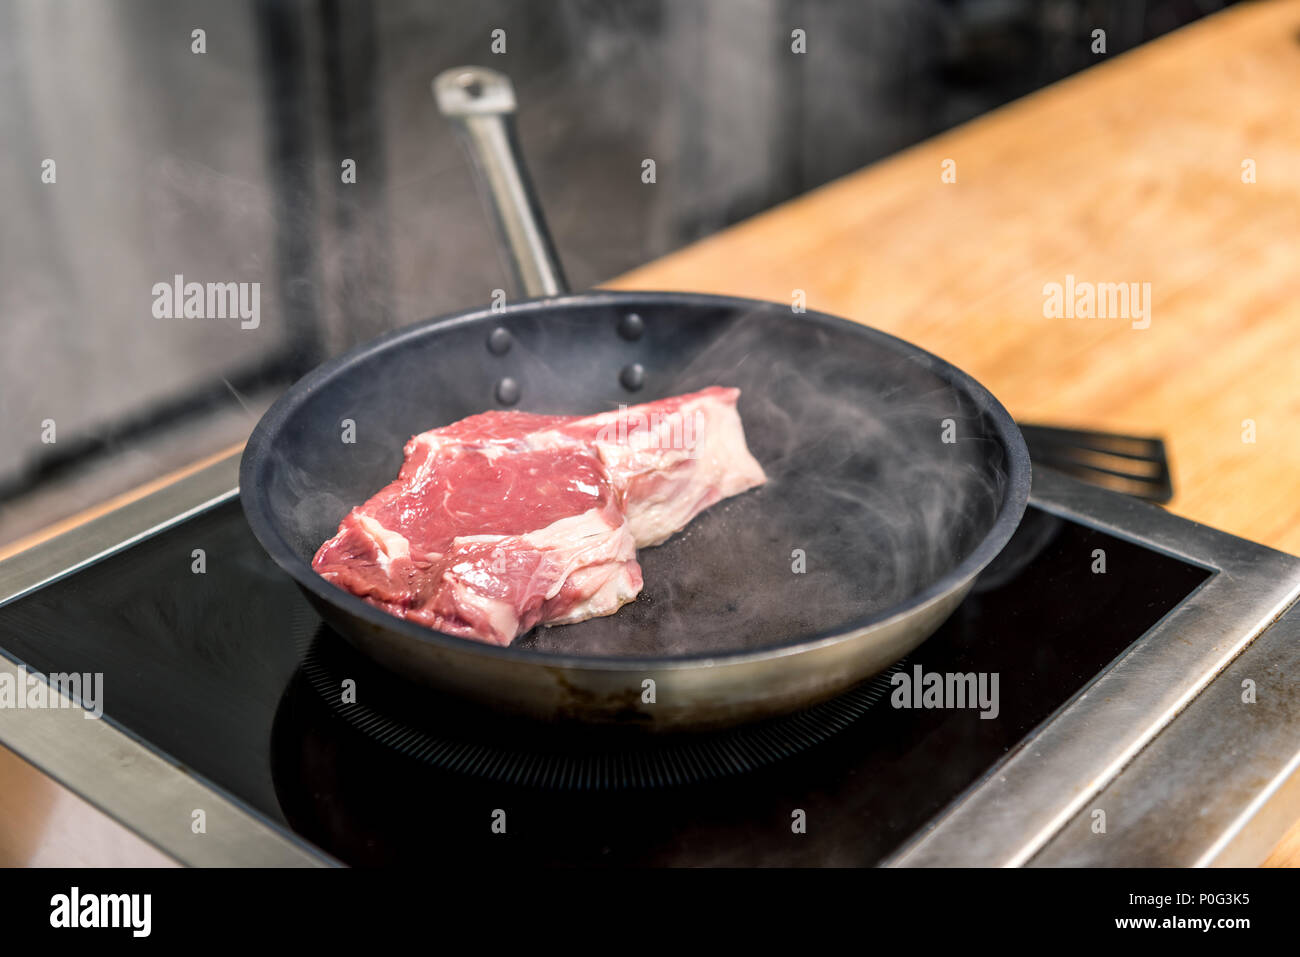 https://c8.alamy.com/comp/P0G3K5/raw-meat-on-frying-pan-on-electric-stove-P0G3K5.jpg